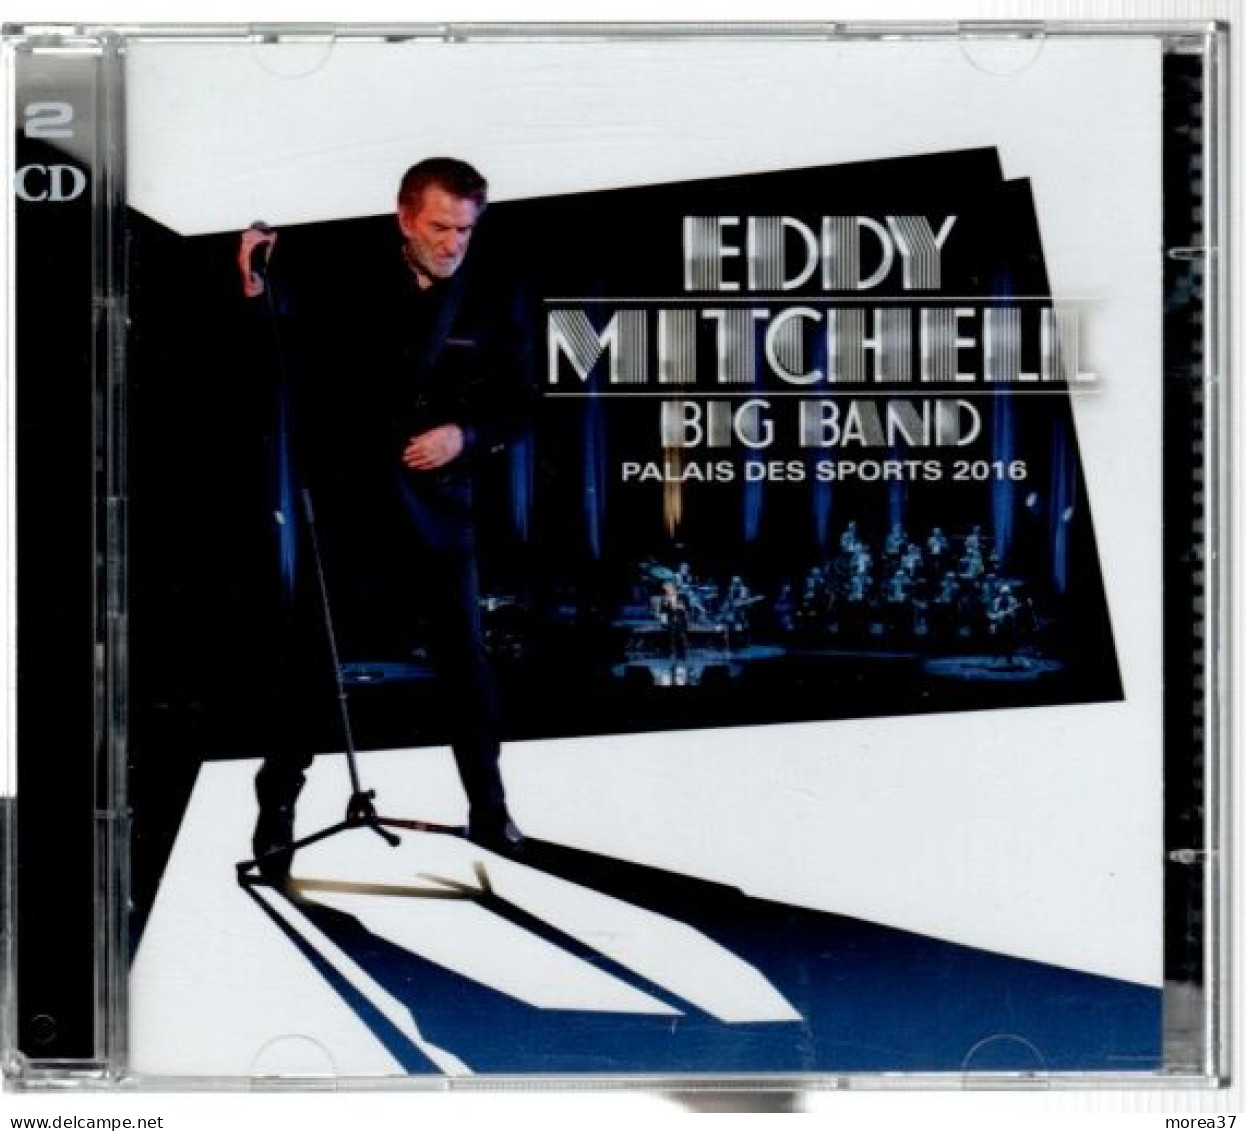 EDDY MITCHELL Big Band  Palais Des Sports 2016  (2cds)   (C02) - Other - French Music